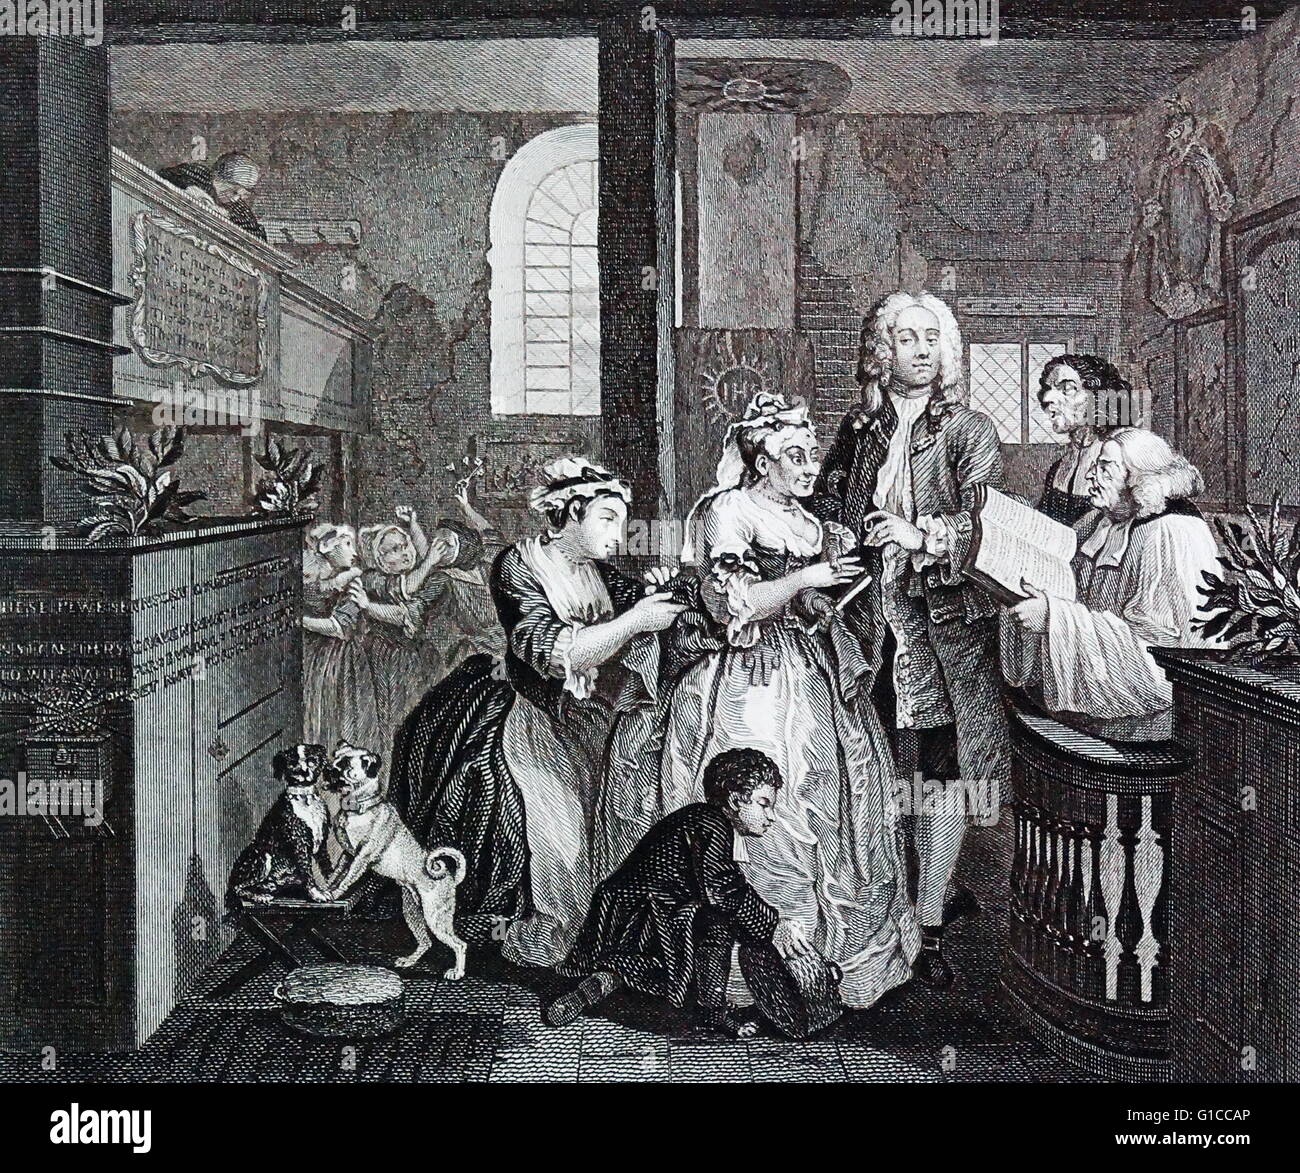 A Rake's Progress - Plate 5 - Married To An Old Maid by William Hogarth (1697 – 1764). English painter, printmaker, pictorial satirist. 'A Rake's Progress' 1733, By William Hogarth (1697 – 1764). English painter, printmaker, satirist. The series shows the decline and fall of Tom Rakewell, the spendthrift son and heir of a rich merchant, who comes to London, wastes all his money on luxurious living, prostitution and gambling Stock Photo